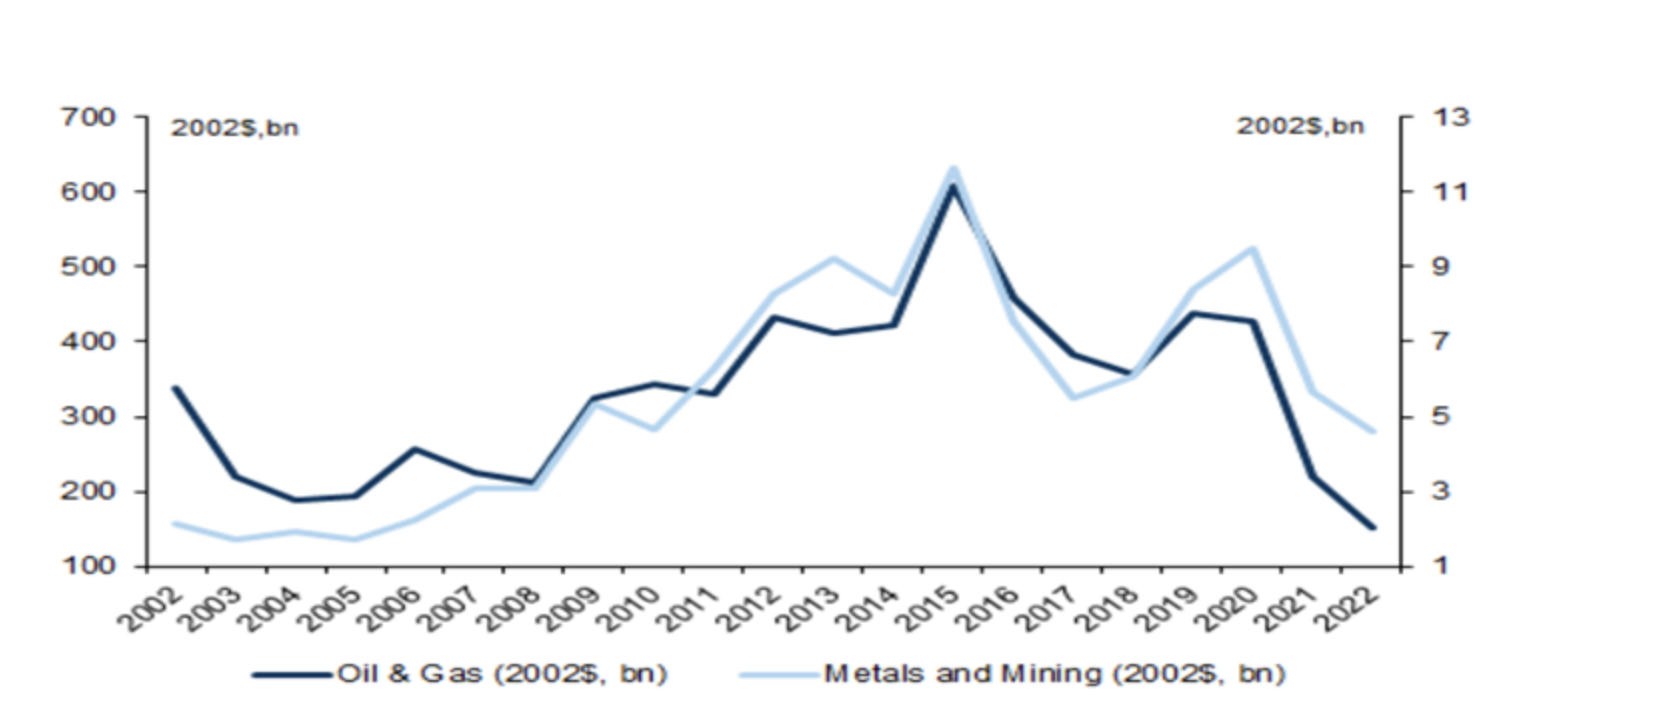 OIL & GAS / METALS & MINING (RHS): REAL CAPEX IN 2002 DOLLARS graph